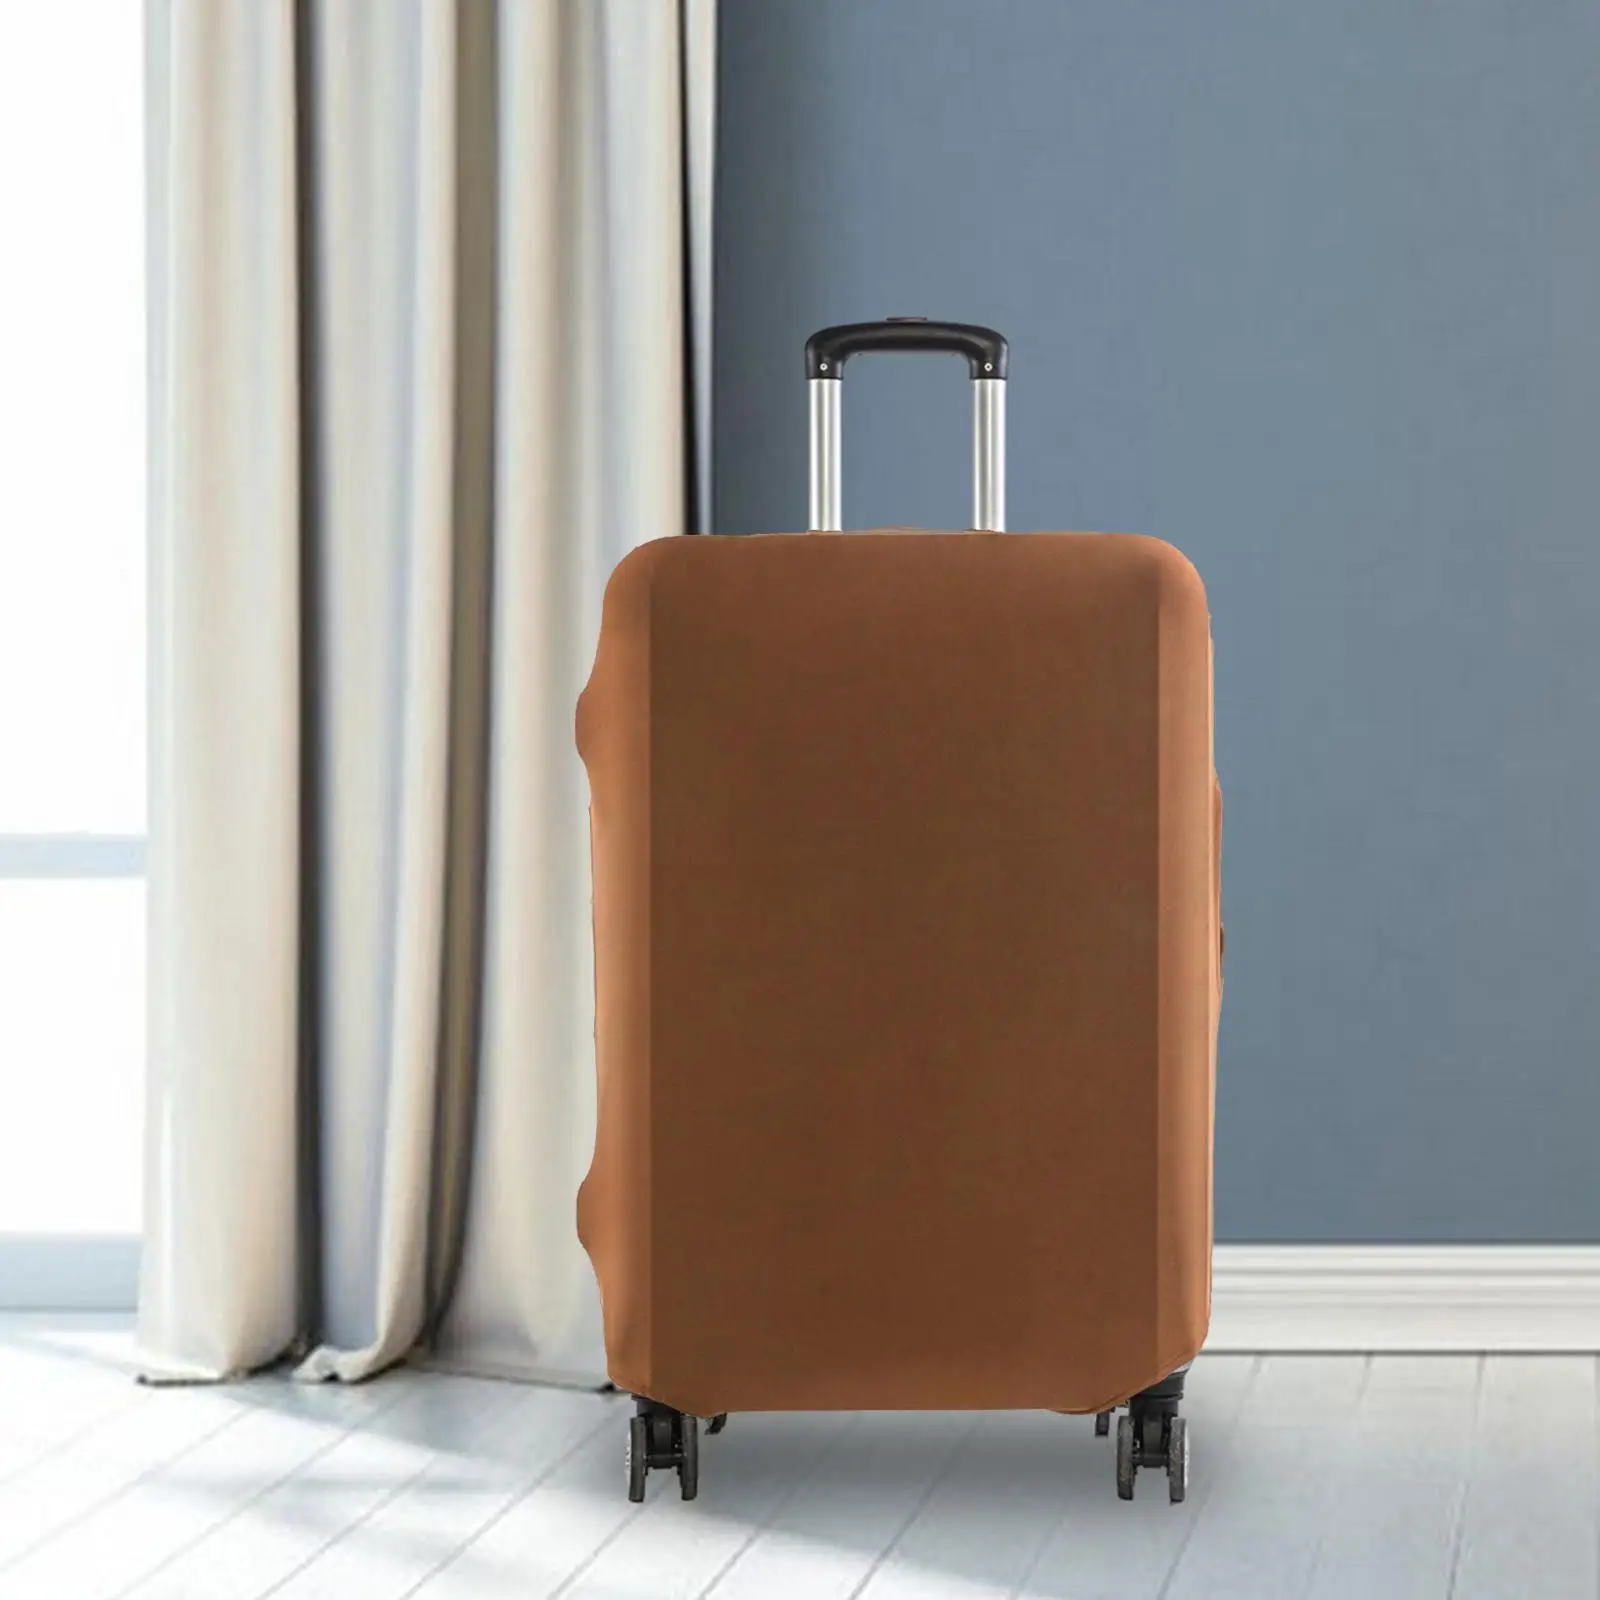 Luggage Cover Elastic Suitcase Cover Brown Sturdy Flexible and Soft Washable